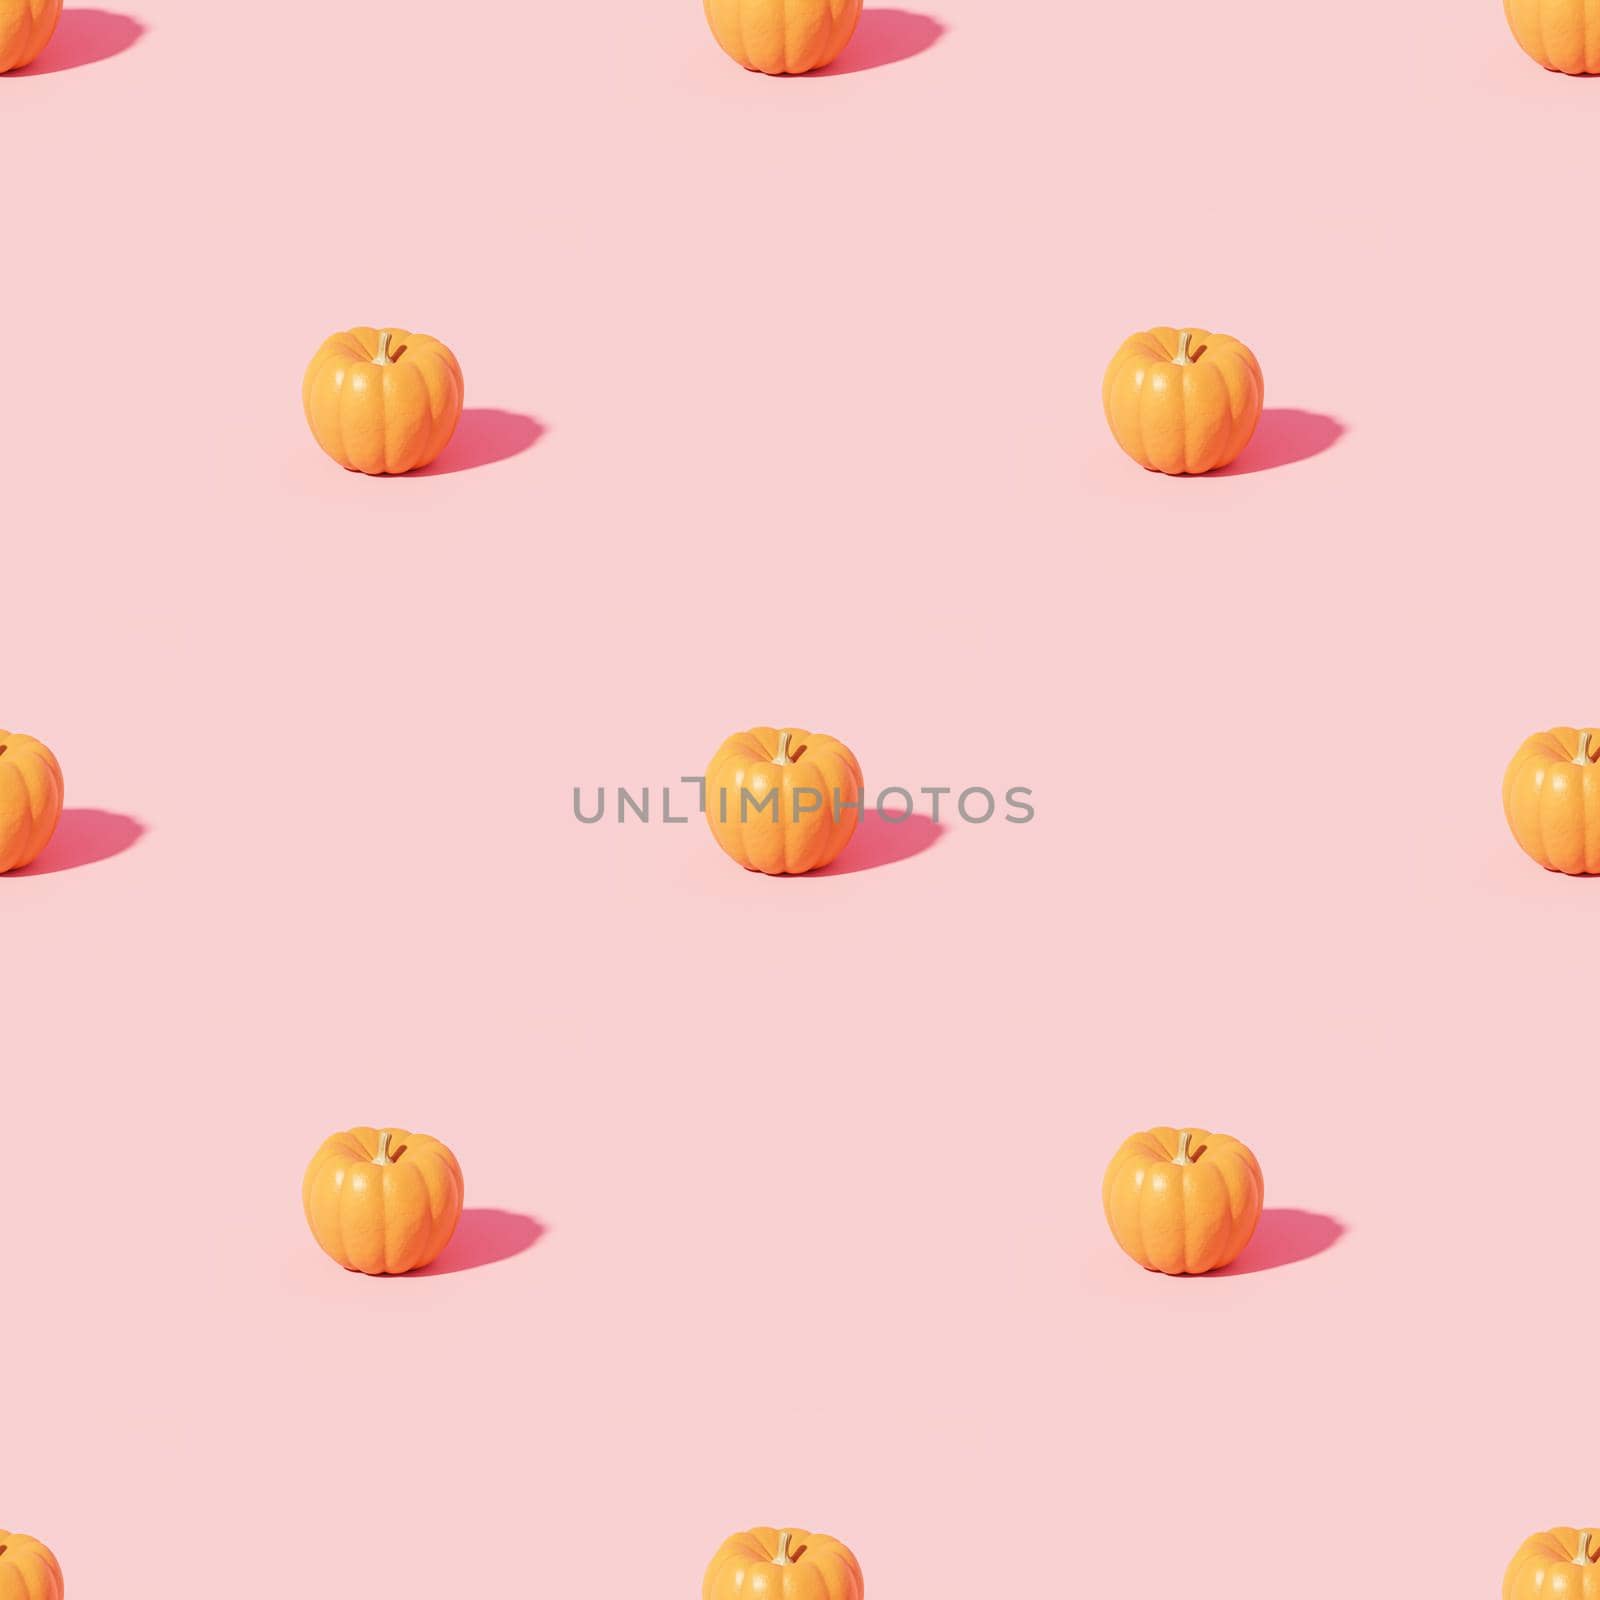 Pumpkins pattern on pink background for advertising on autumn holidays or sales, 3d render by Frostroomhead